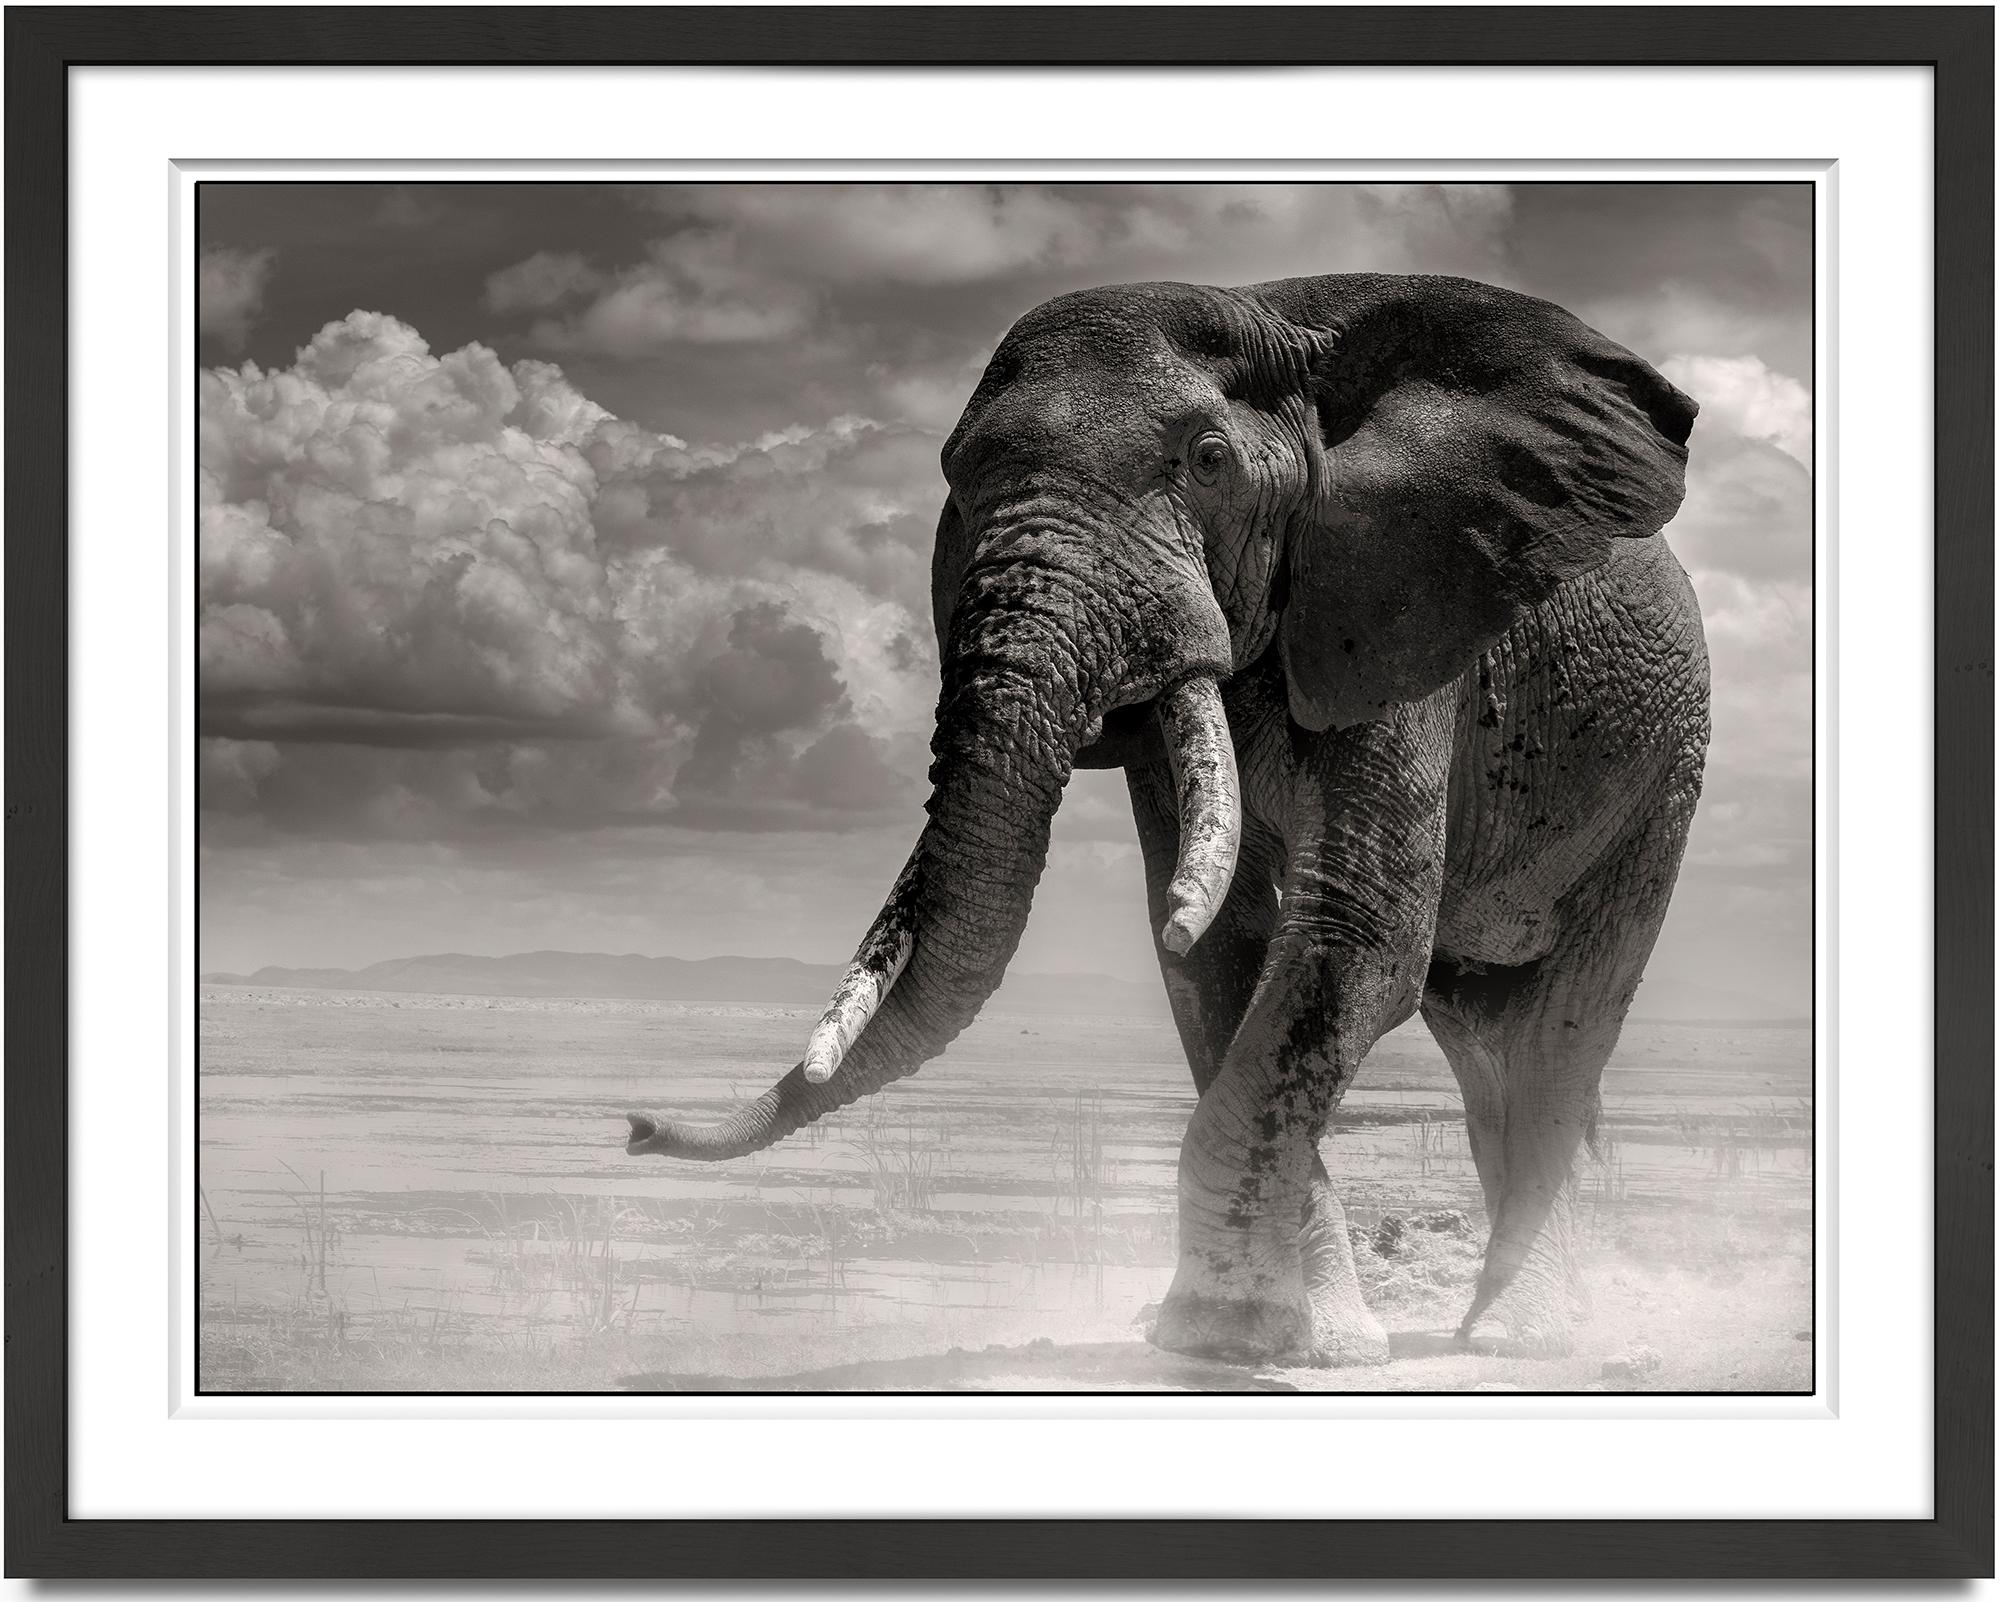 Elephant bull coming out of the marsh, black and white photography, animal - Photograph by Joachim Schmeisser